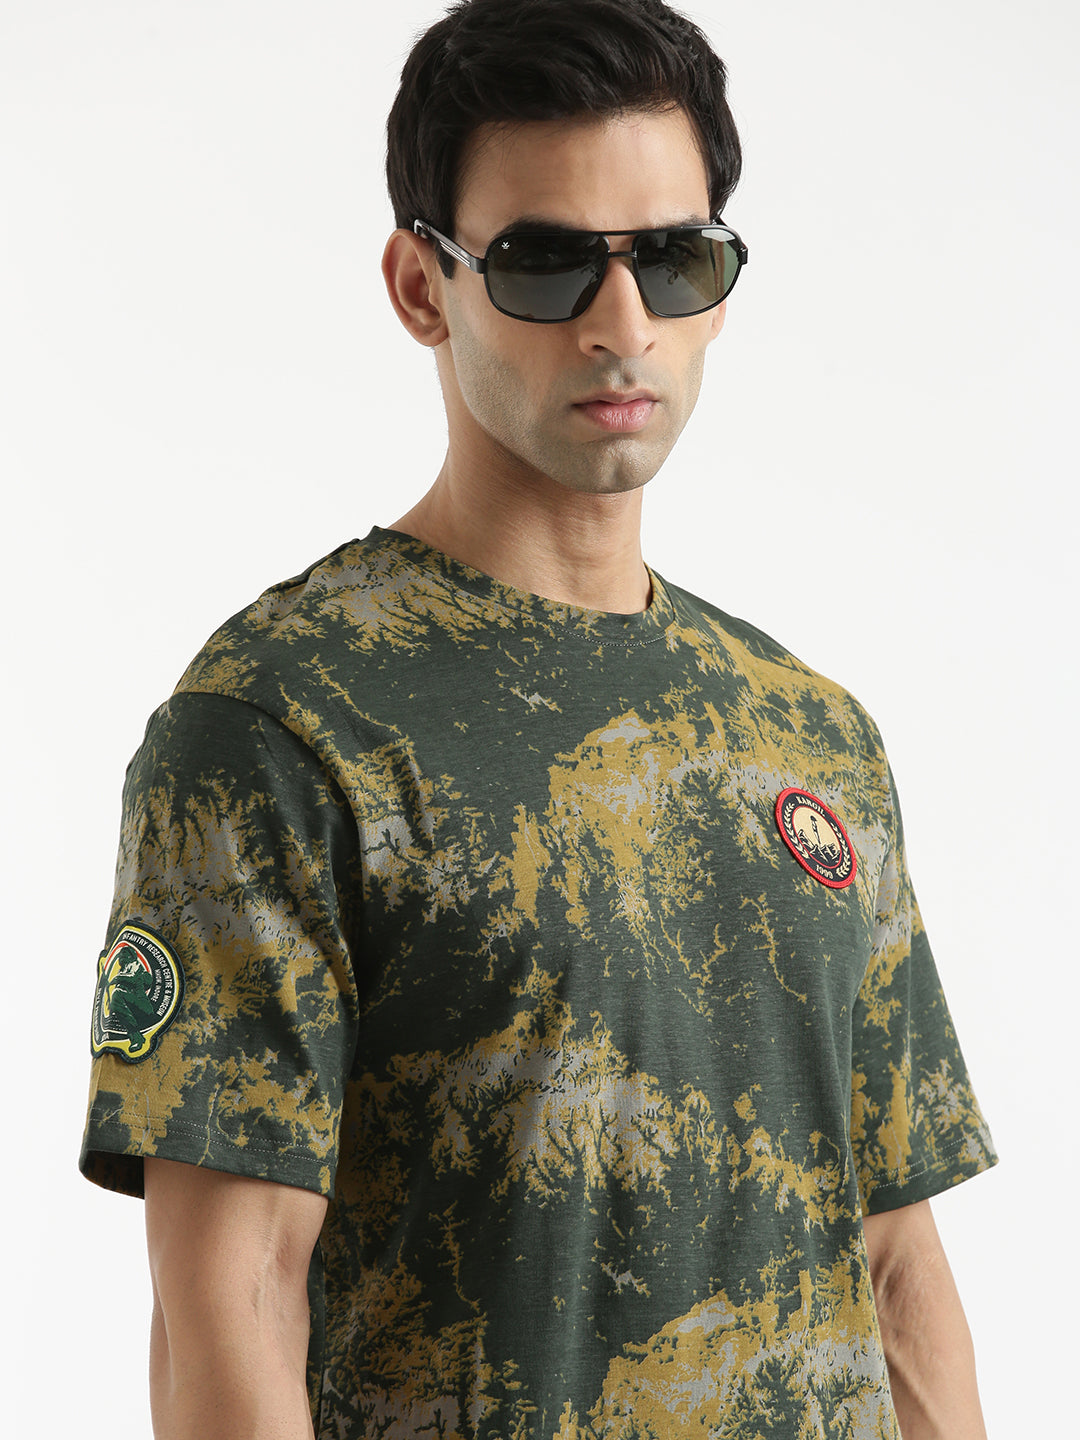 Indian Infantry By A47 Printed Camo T-Shirt